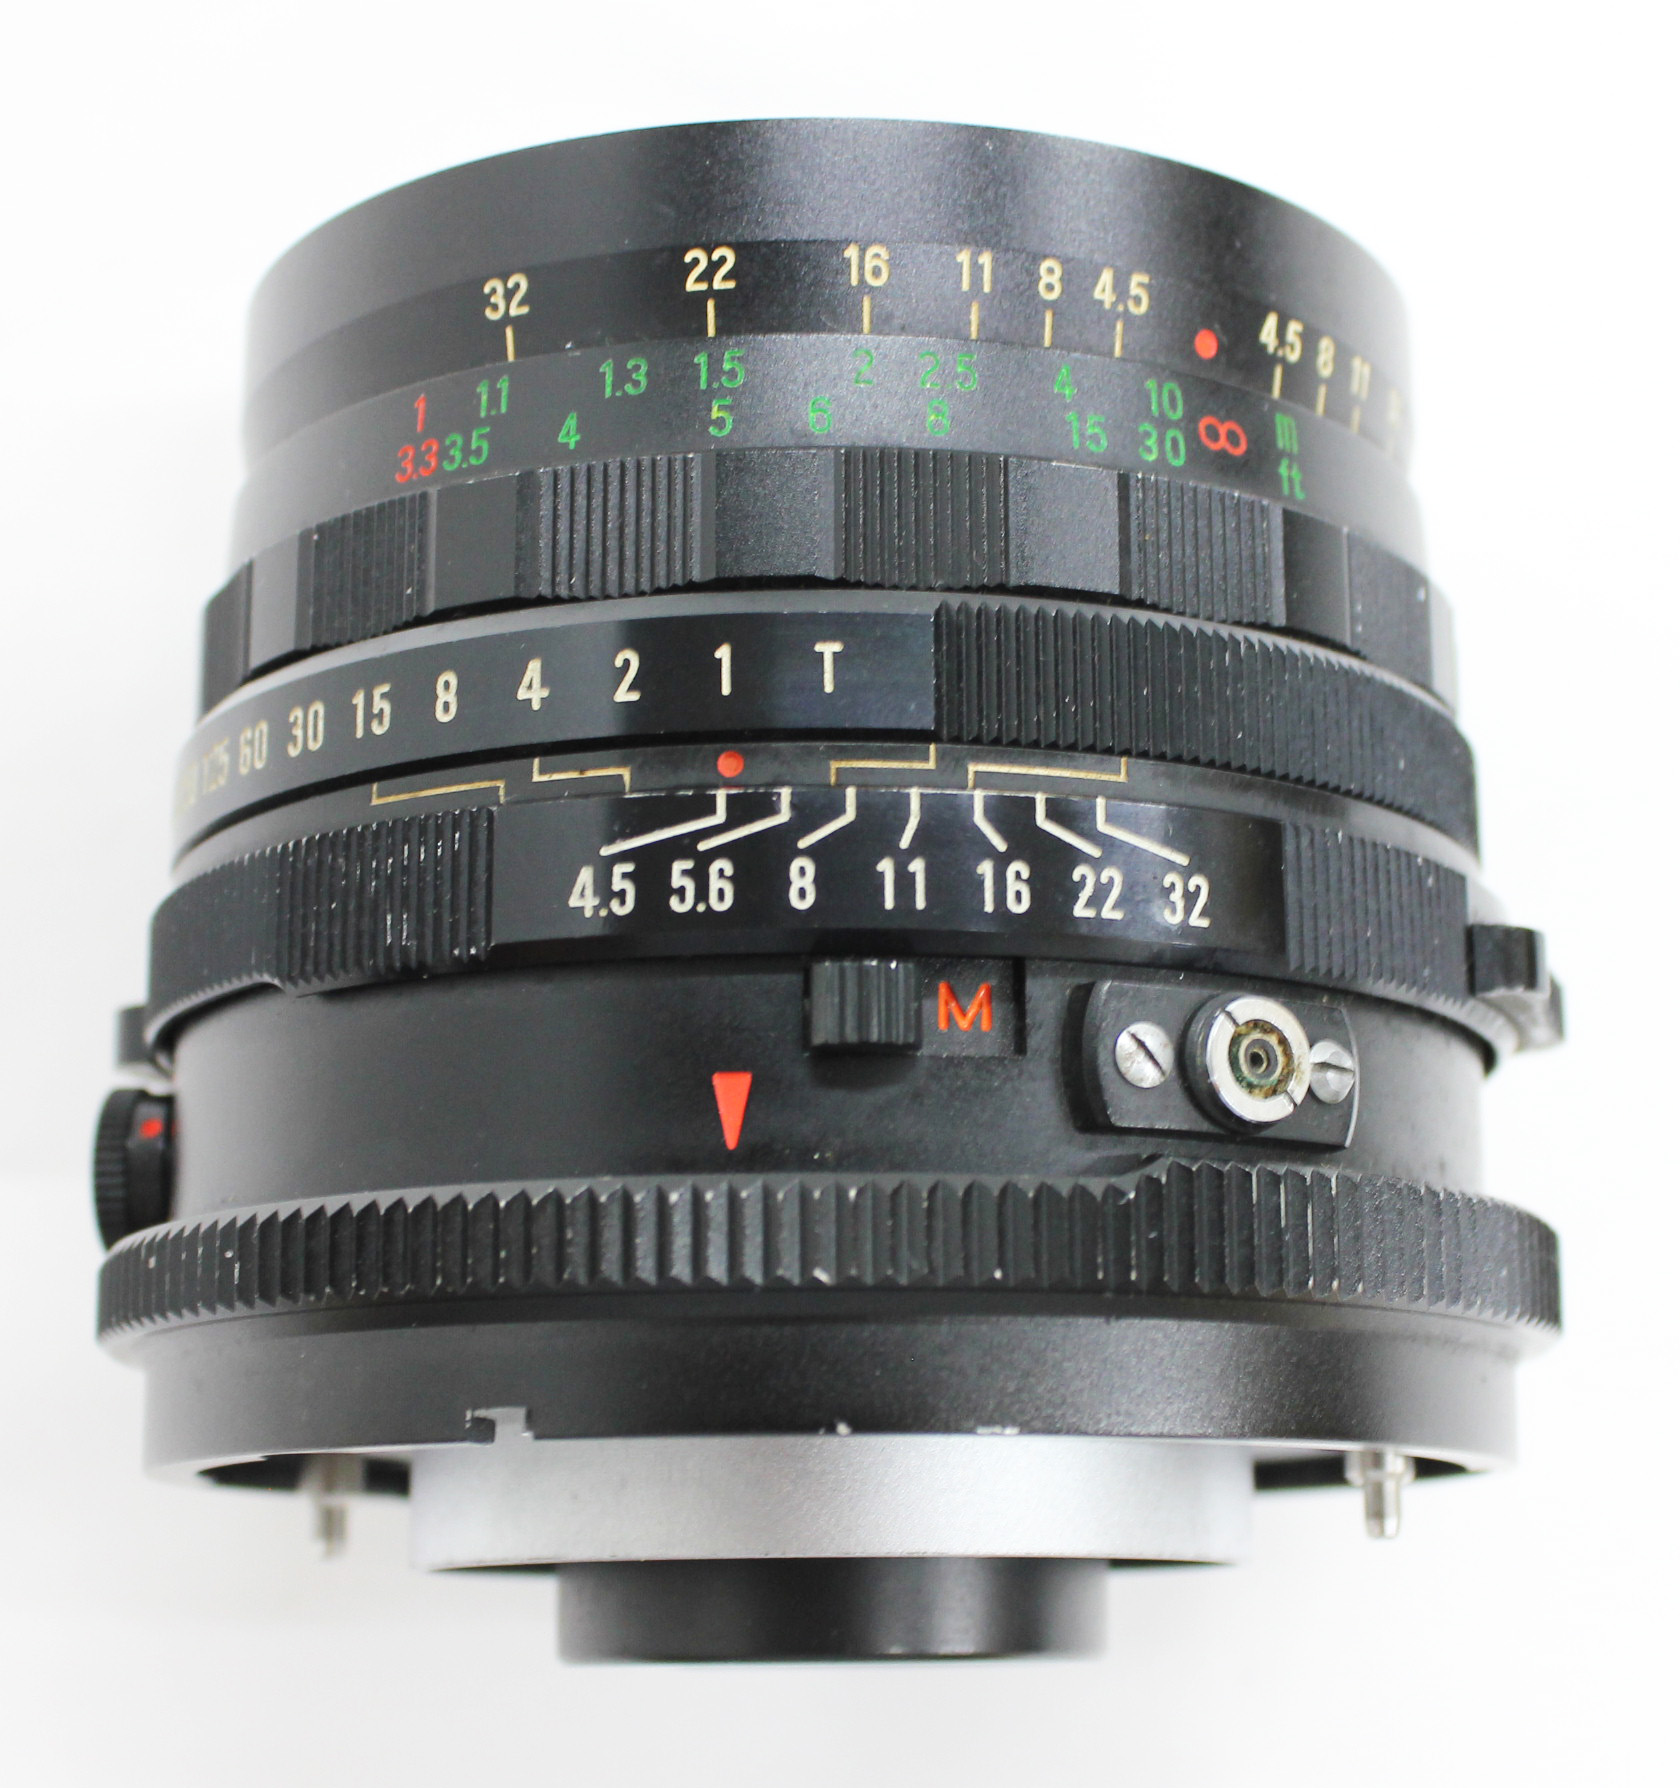  Mamiya Sekor C 50mm F/4.5 Wide Angle Lens for RB67 Pro S SD from Japan Photo 2